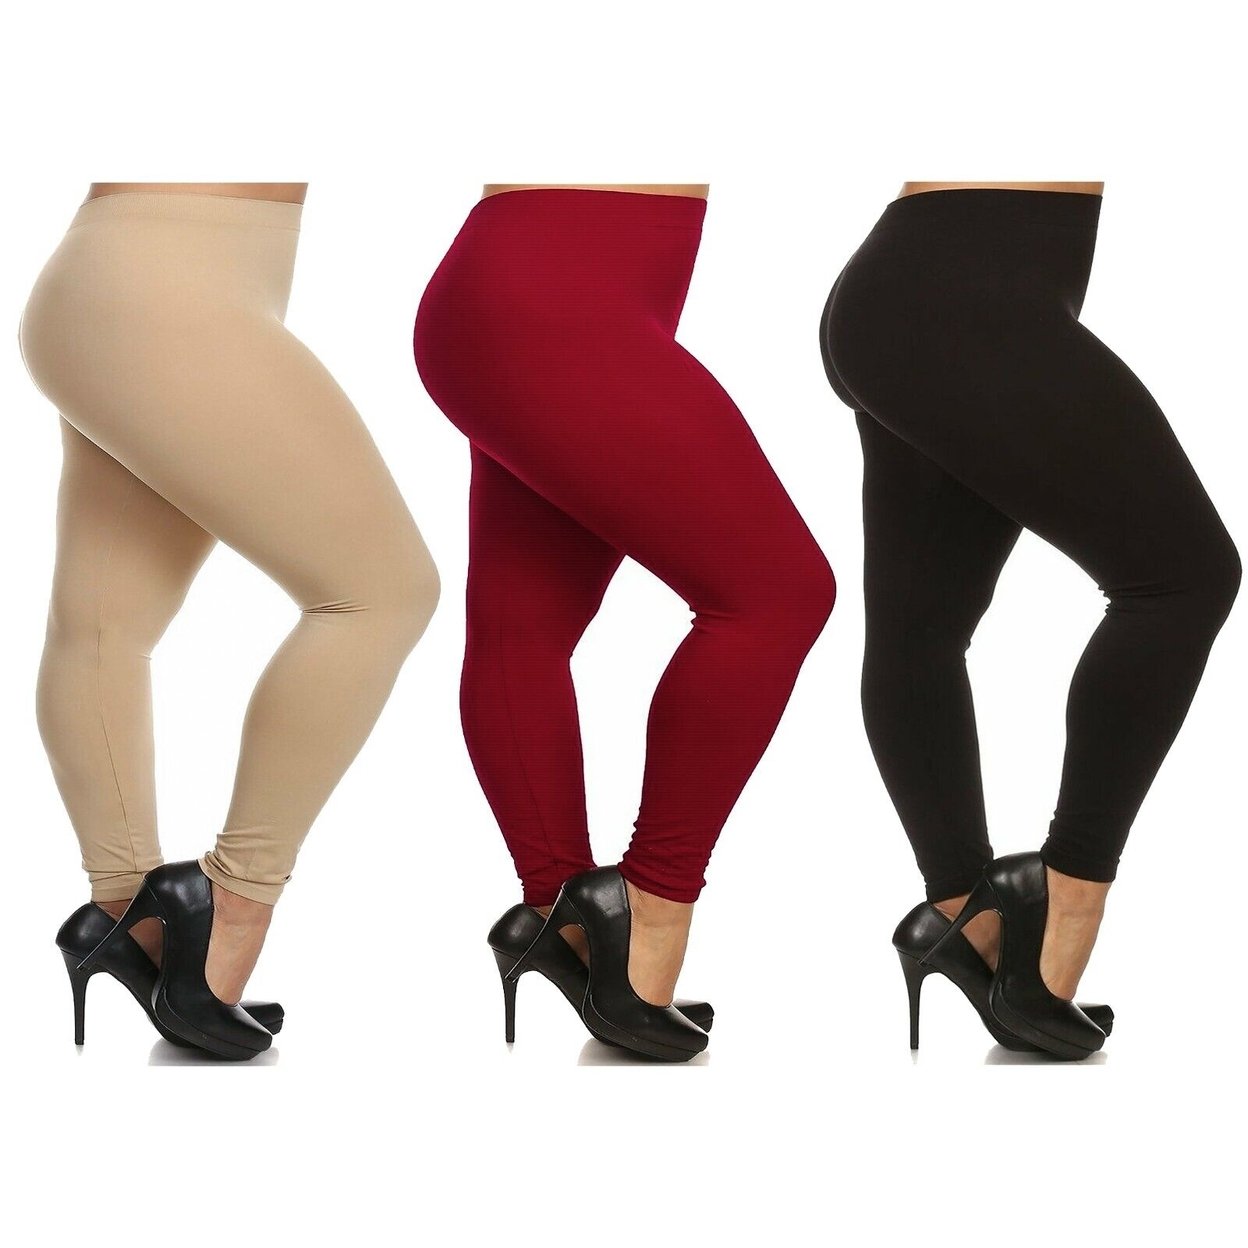 3-Pack: Women's Casual Ultra-Soft Smooth High Waisted Athletic Active Yoga Leggings Plus Size Available - Beige,black, Red, 1x